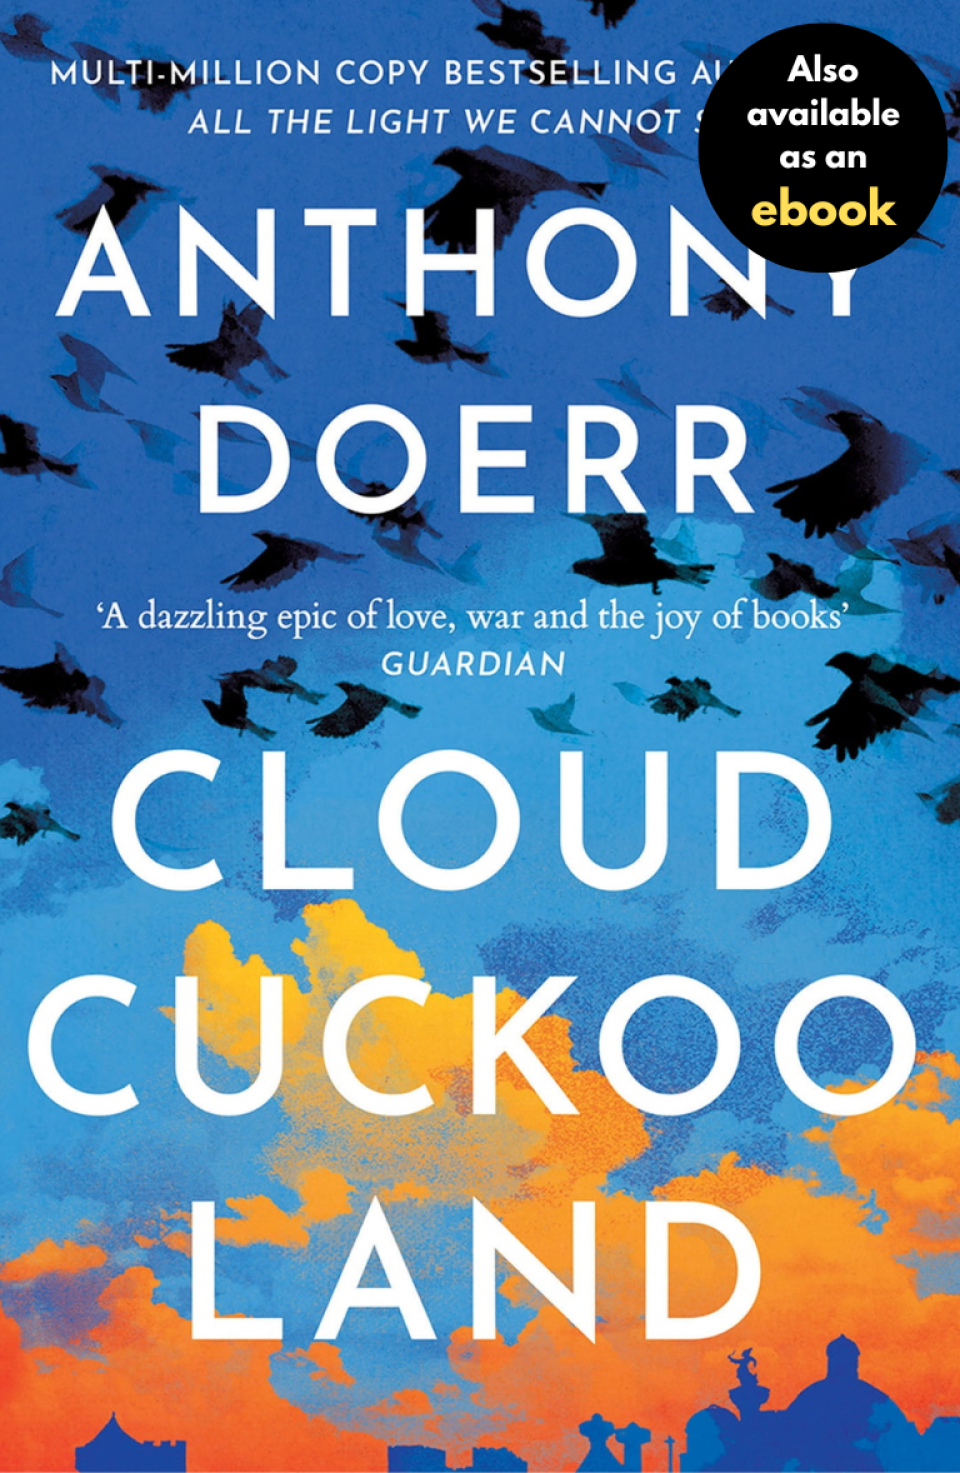 Shows the cover art for Cloud Cuckoo Land by Anthony Doerr